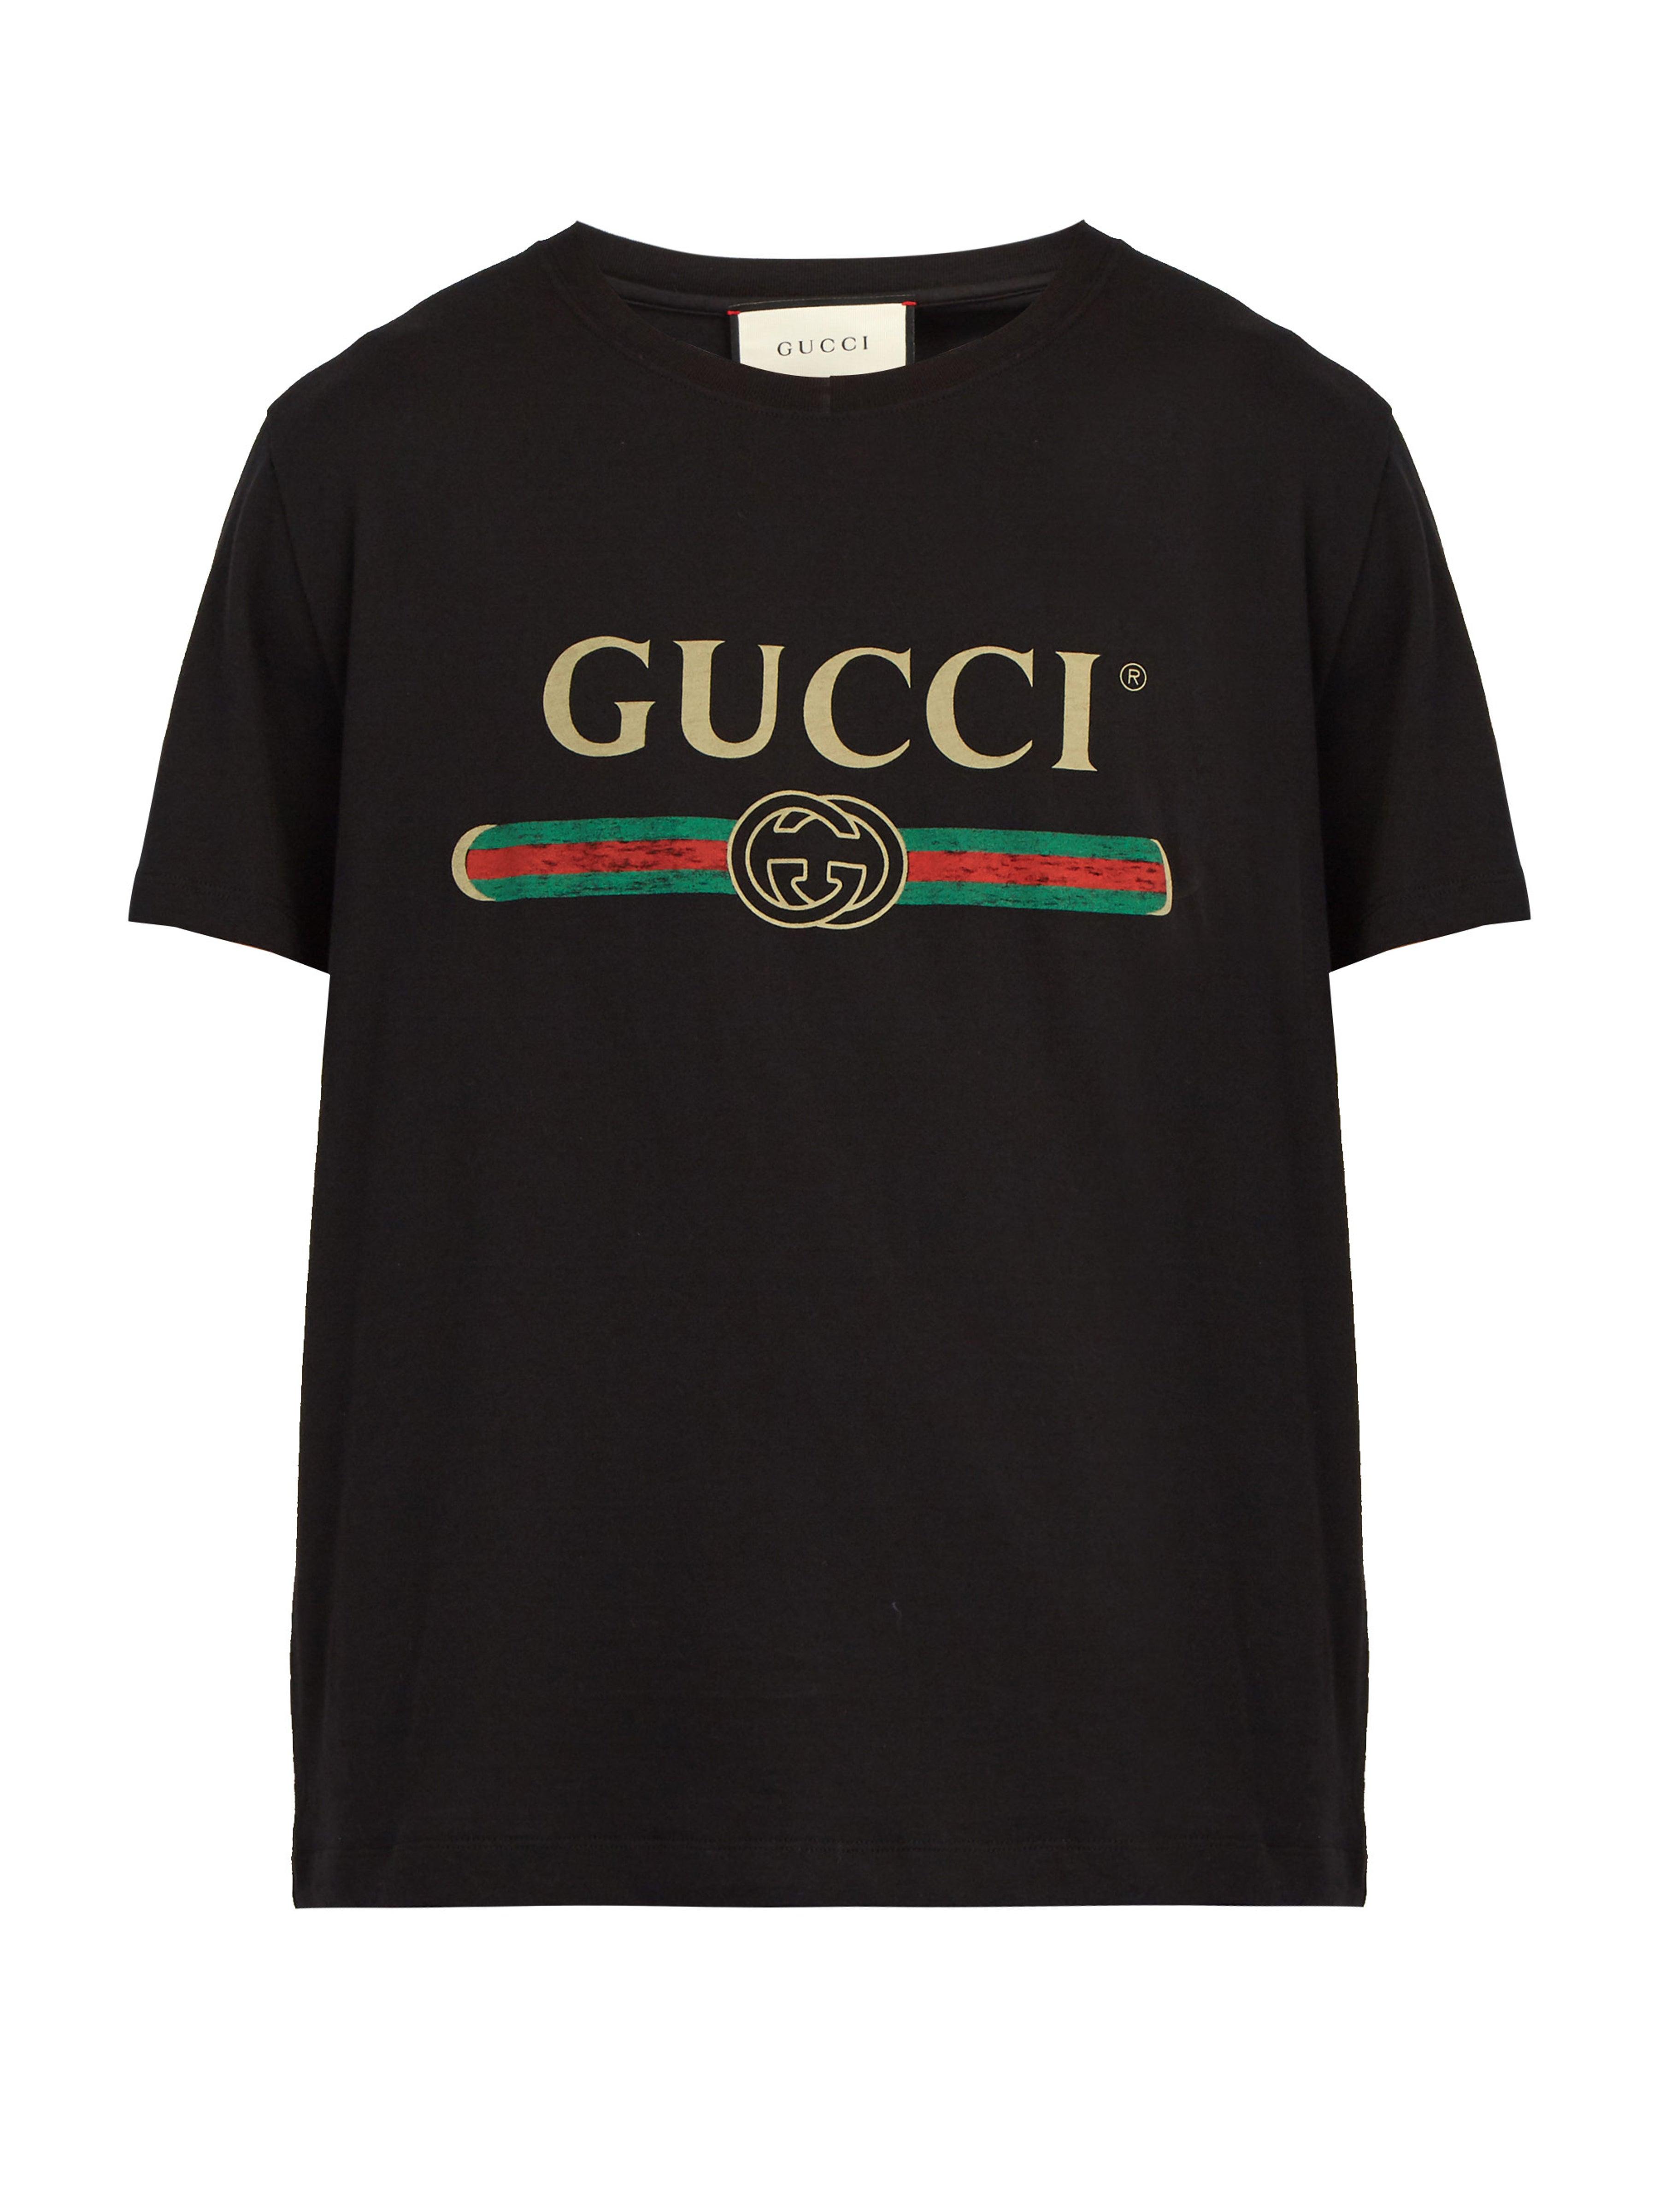 Gucci Fake Logo Print Cotton T Shirt in Black for Men - Save 16% - Lyst